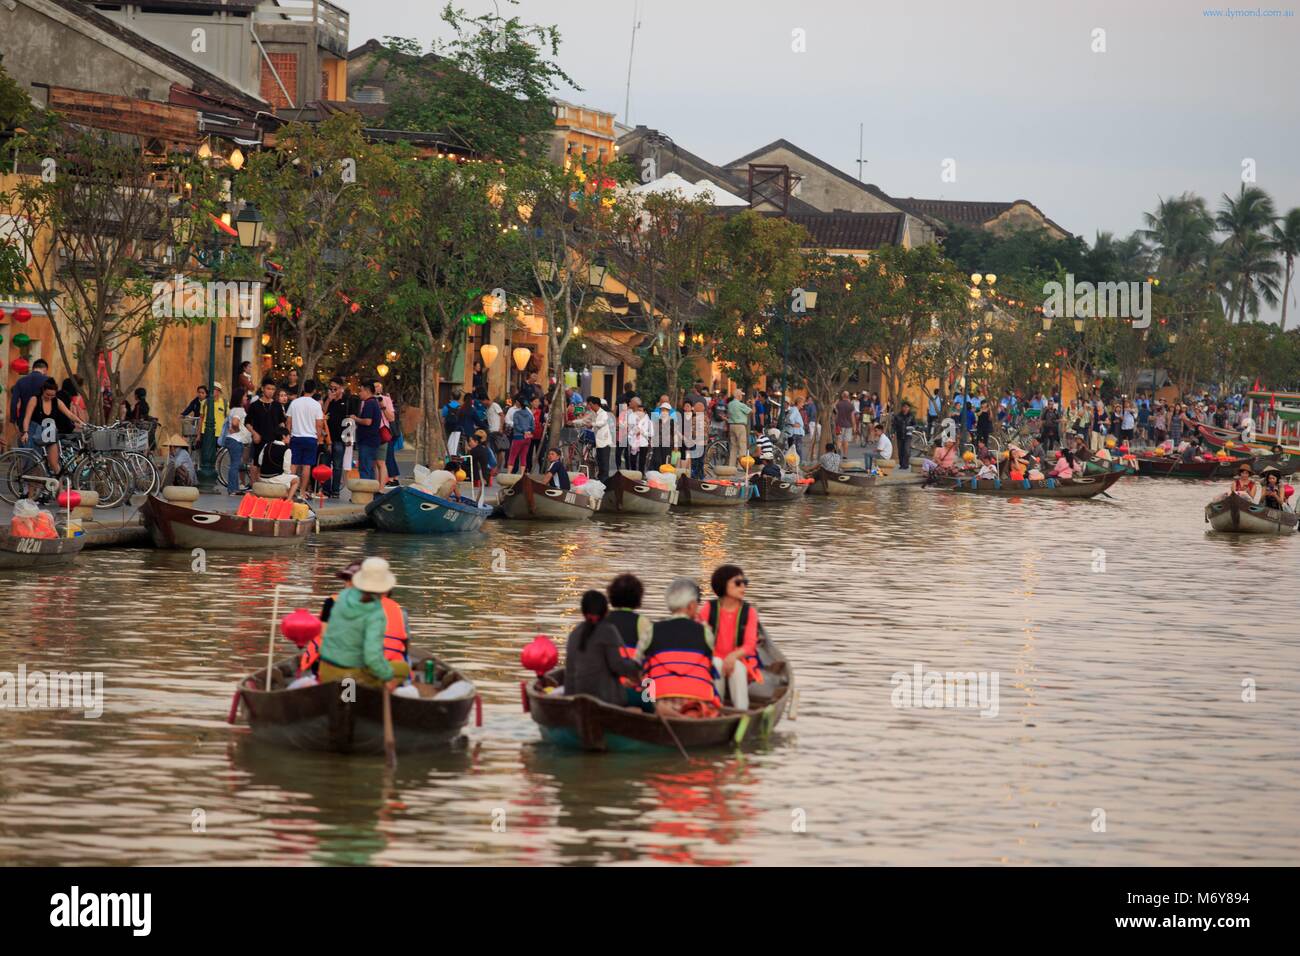 A boat trip on the Thu Bon river is a popular activity for locals and tourists alike in Hoi An, Vietnam Stock Photo